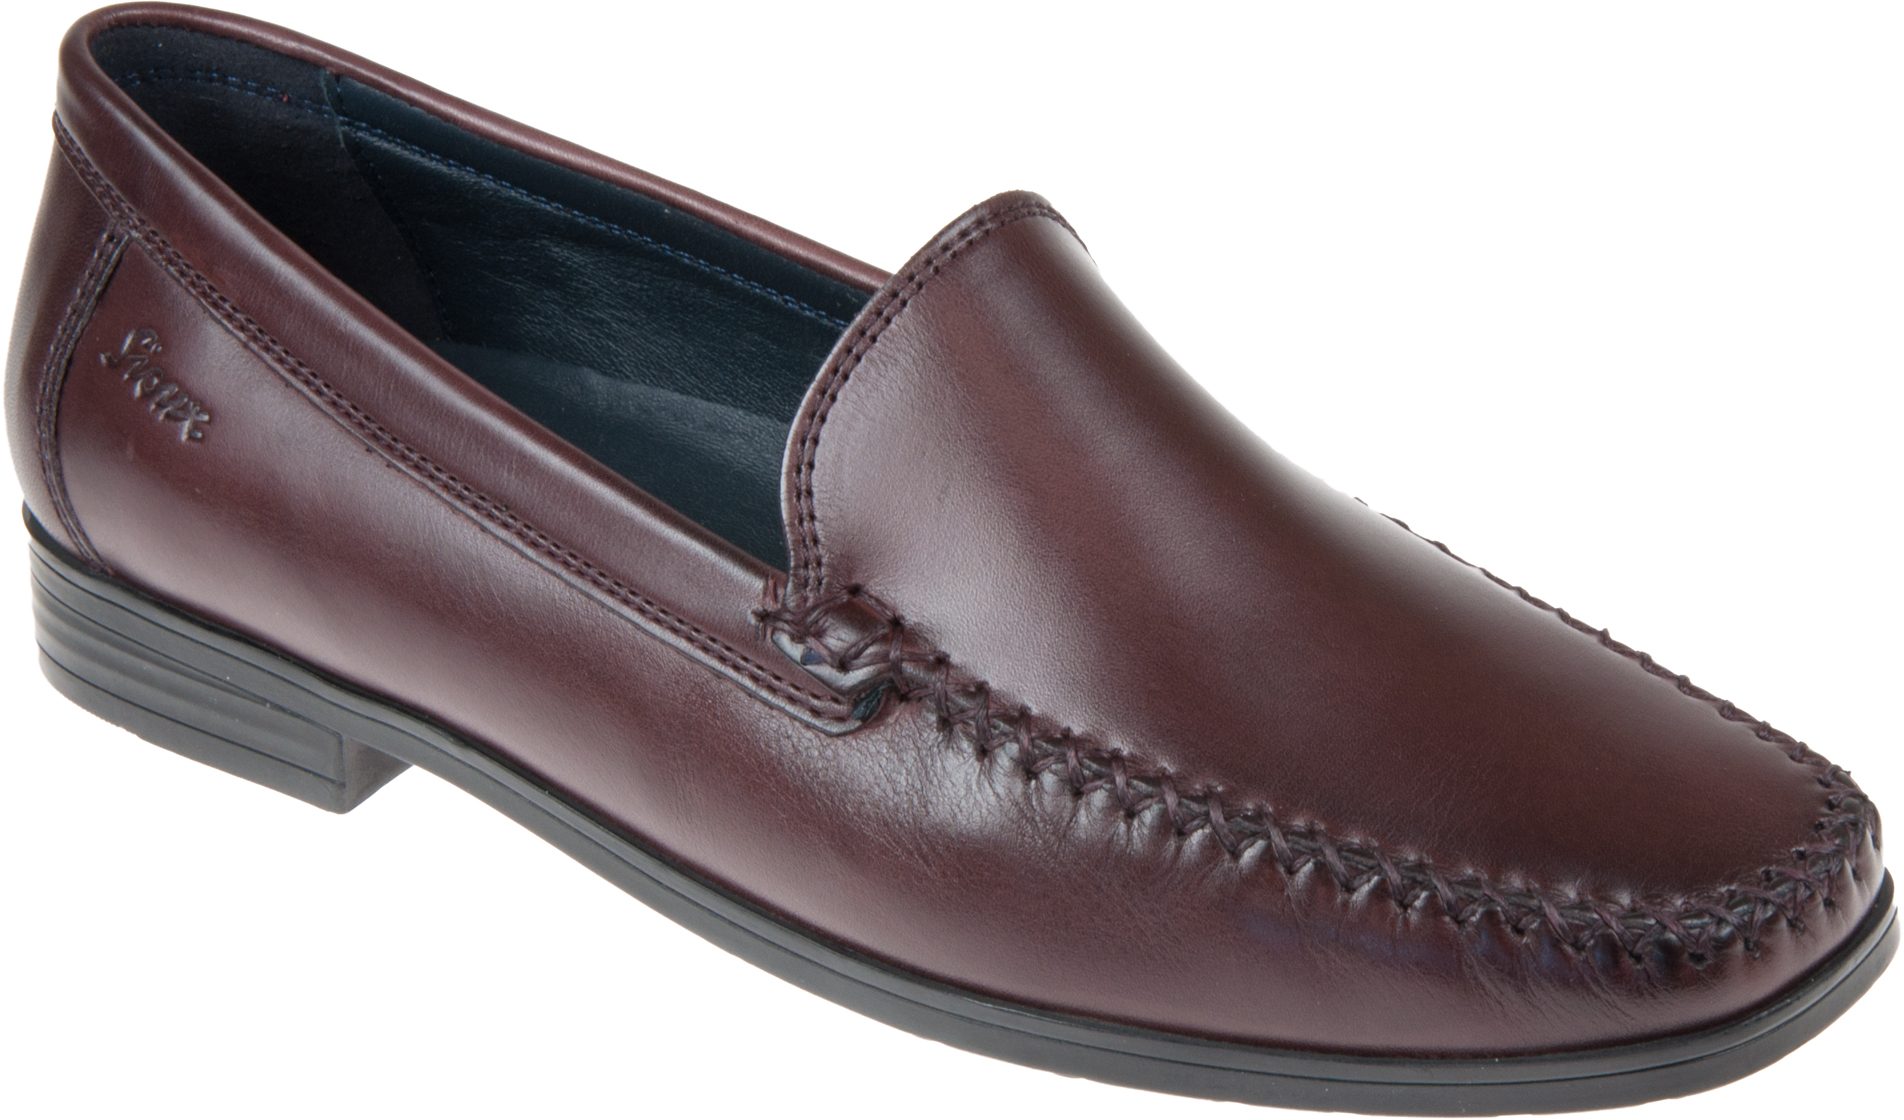 Sioux Campina Amarone 60598 - Everyday Shoes - Humphries Shoes